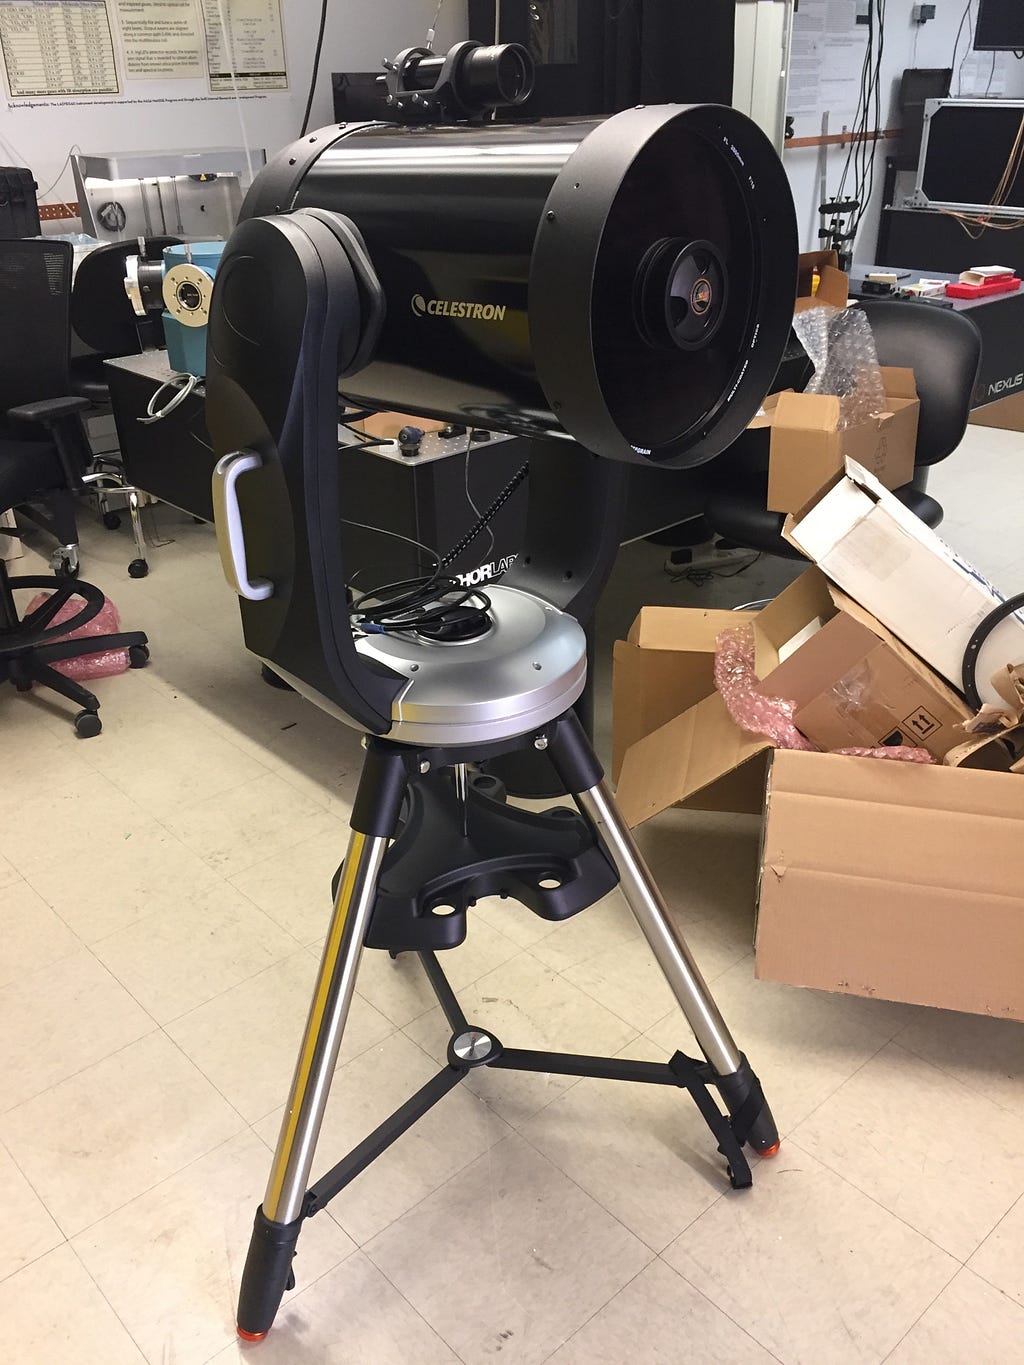 A portable celestron telescope set up indoors in a laboratory. Discarded boxes and bubble wrap are in the background.